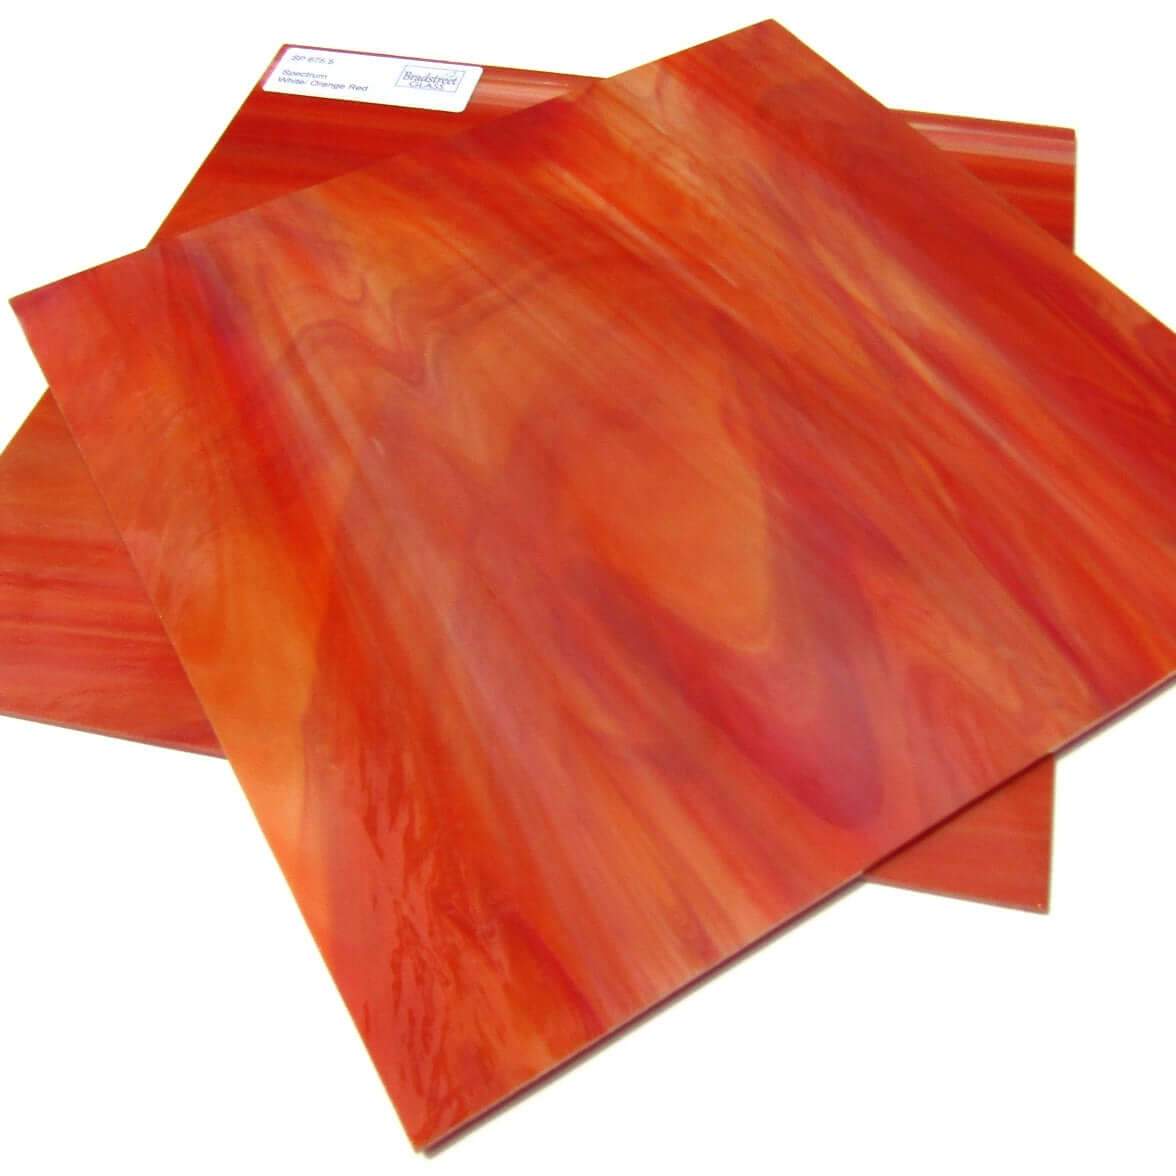 Spectrum SP 675.5 Stained Glass Sheet, White, Orange, and Red Streaky Swirled Opaque